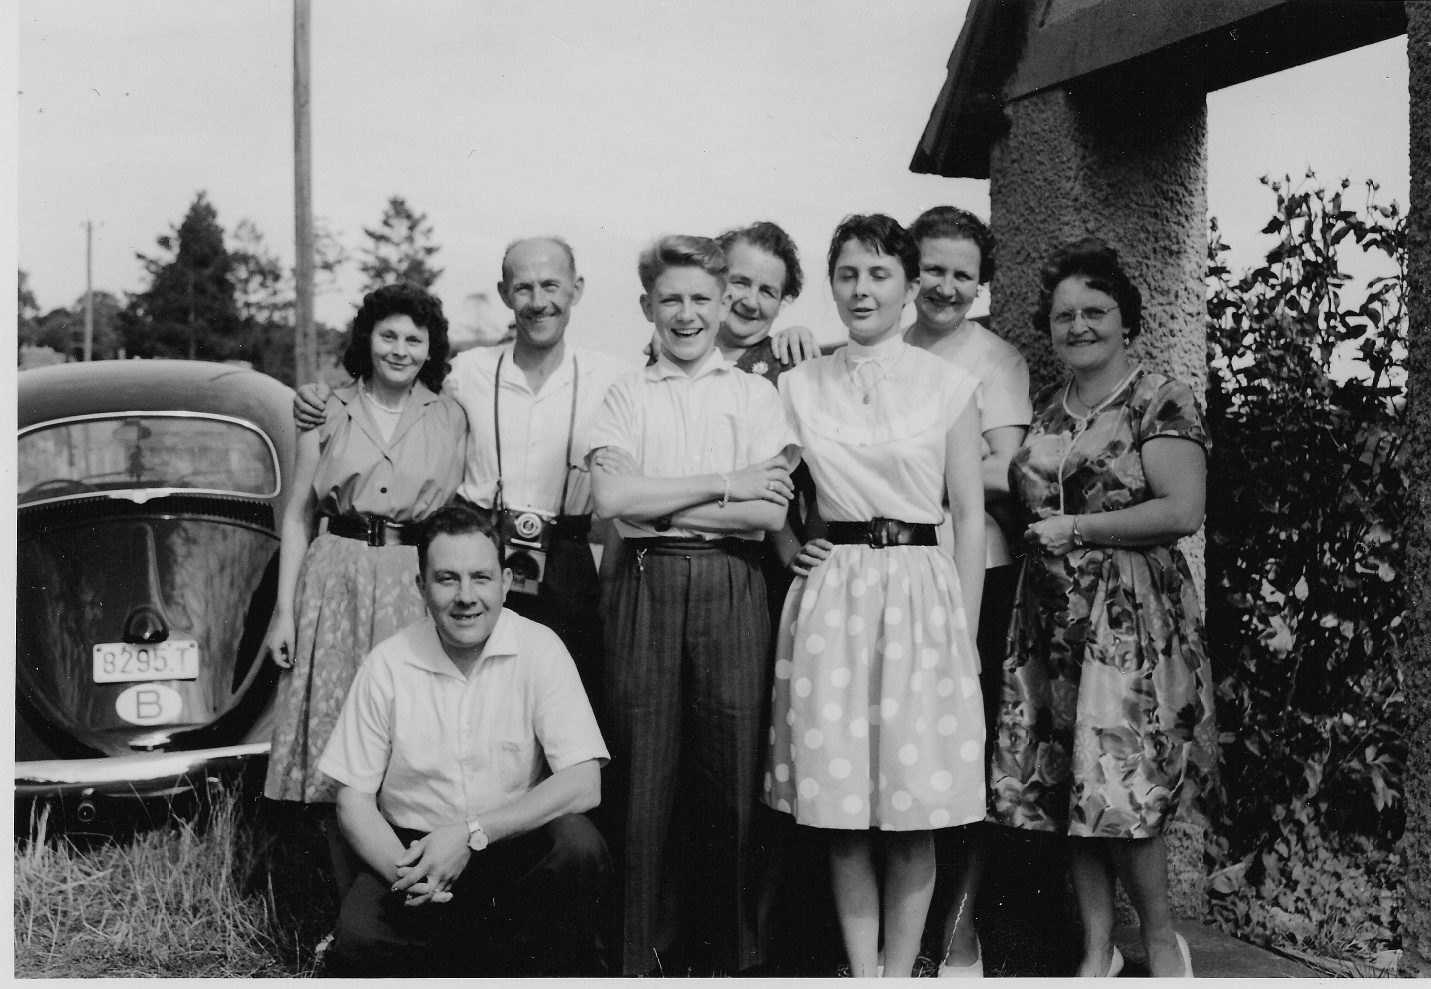 an old po of a group of people posing for a po